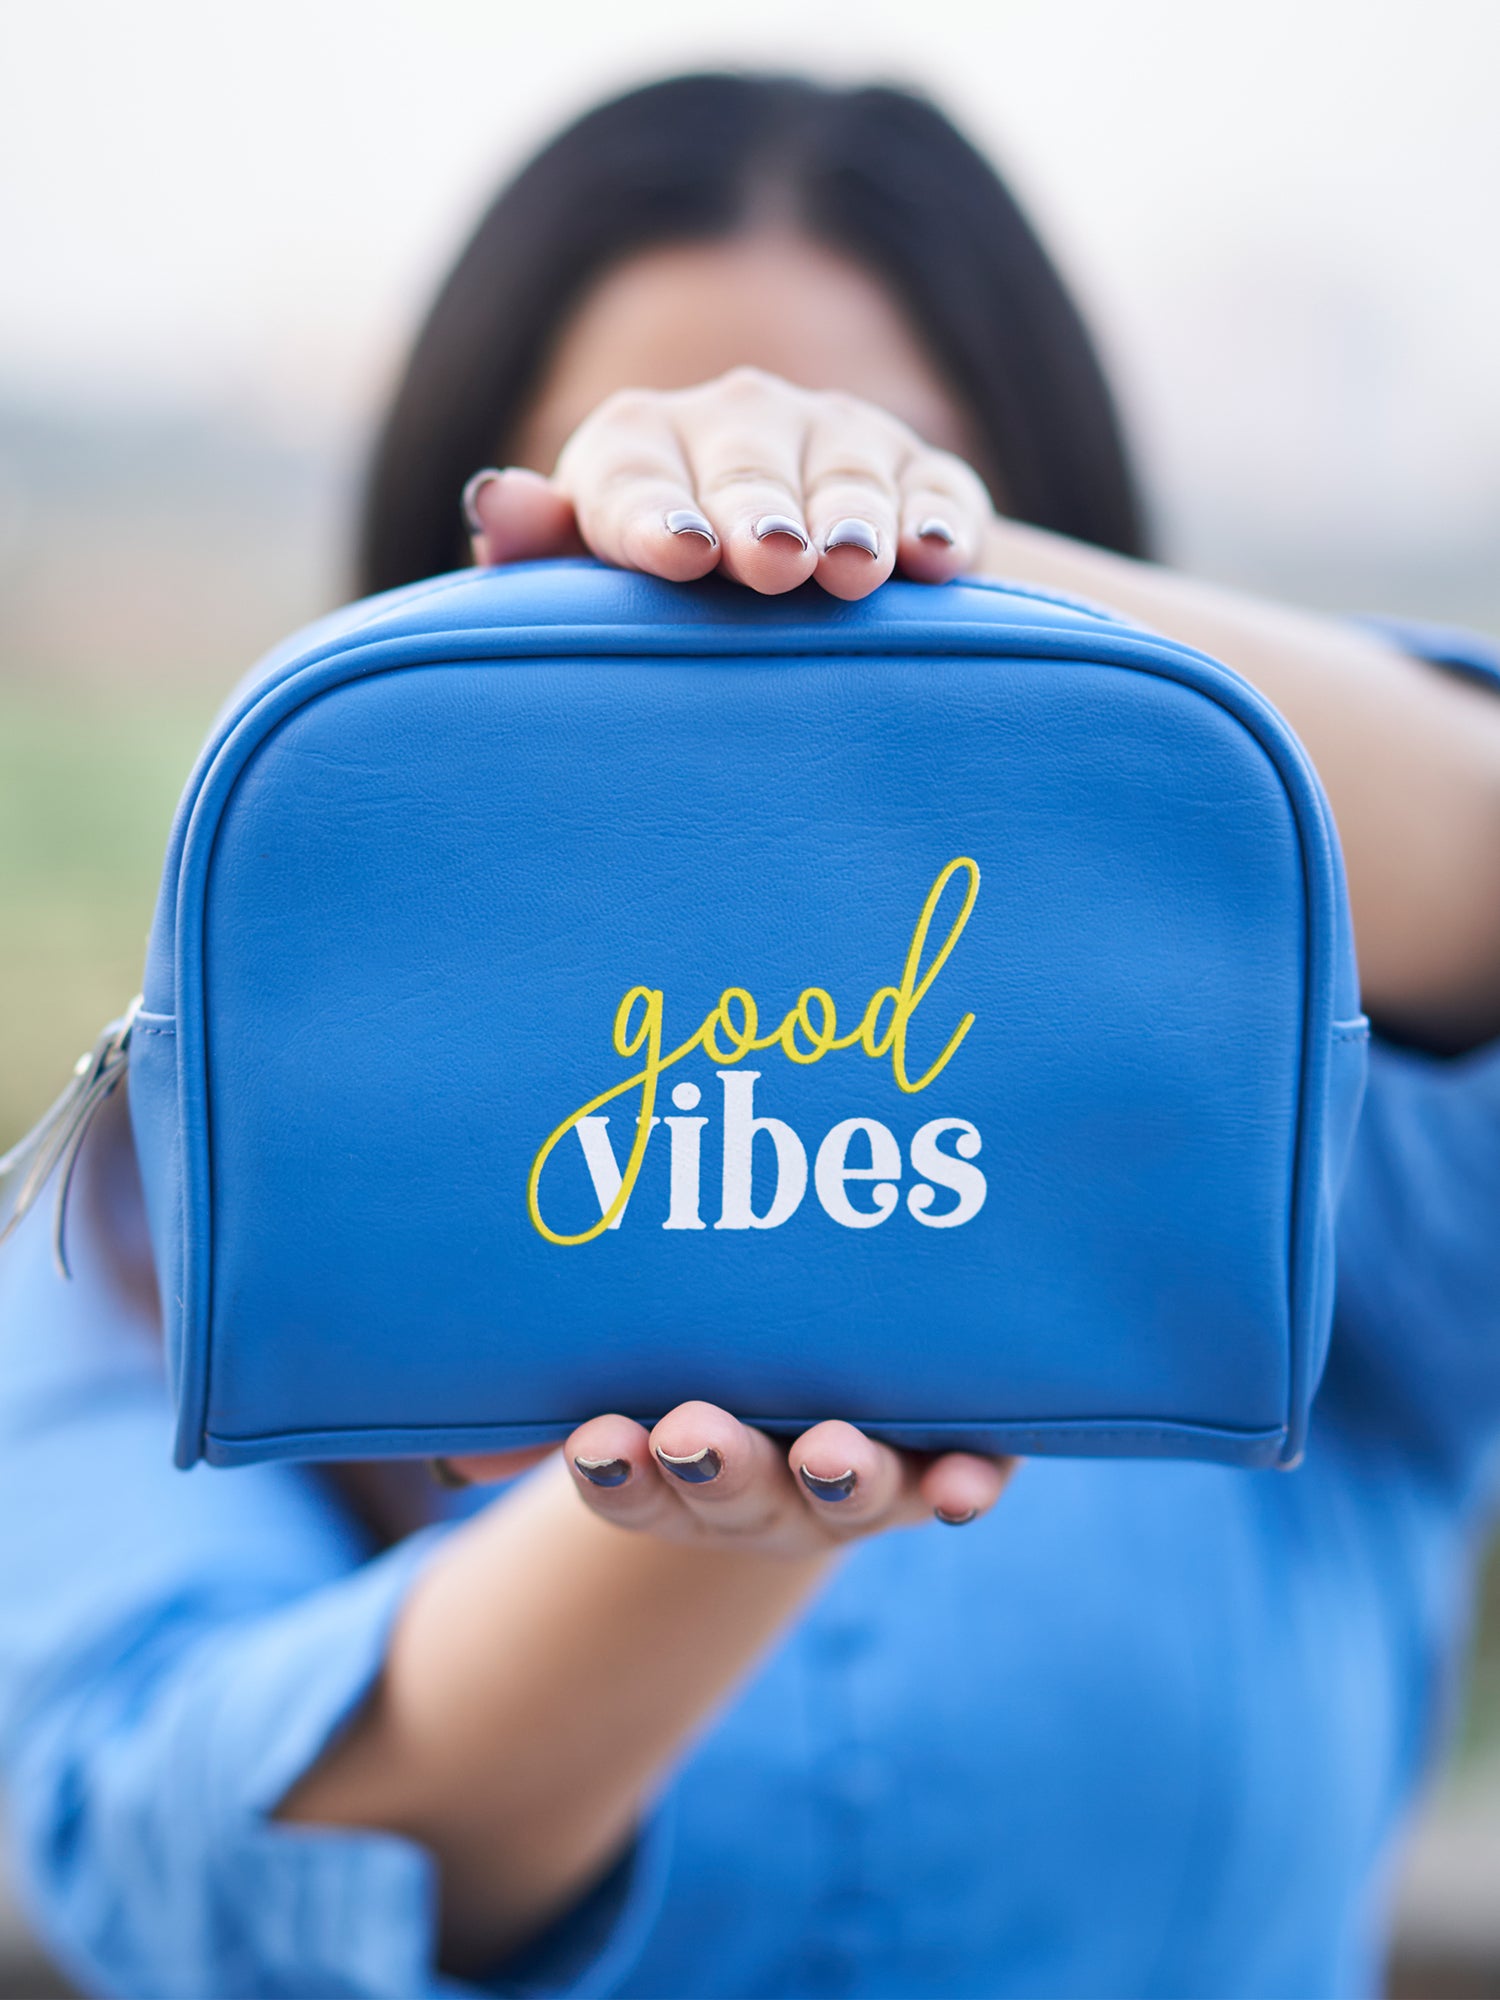 Good Vibes Pouch